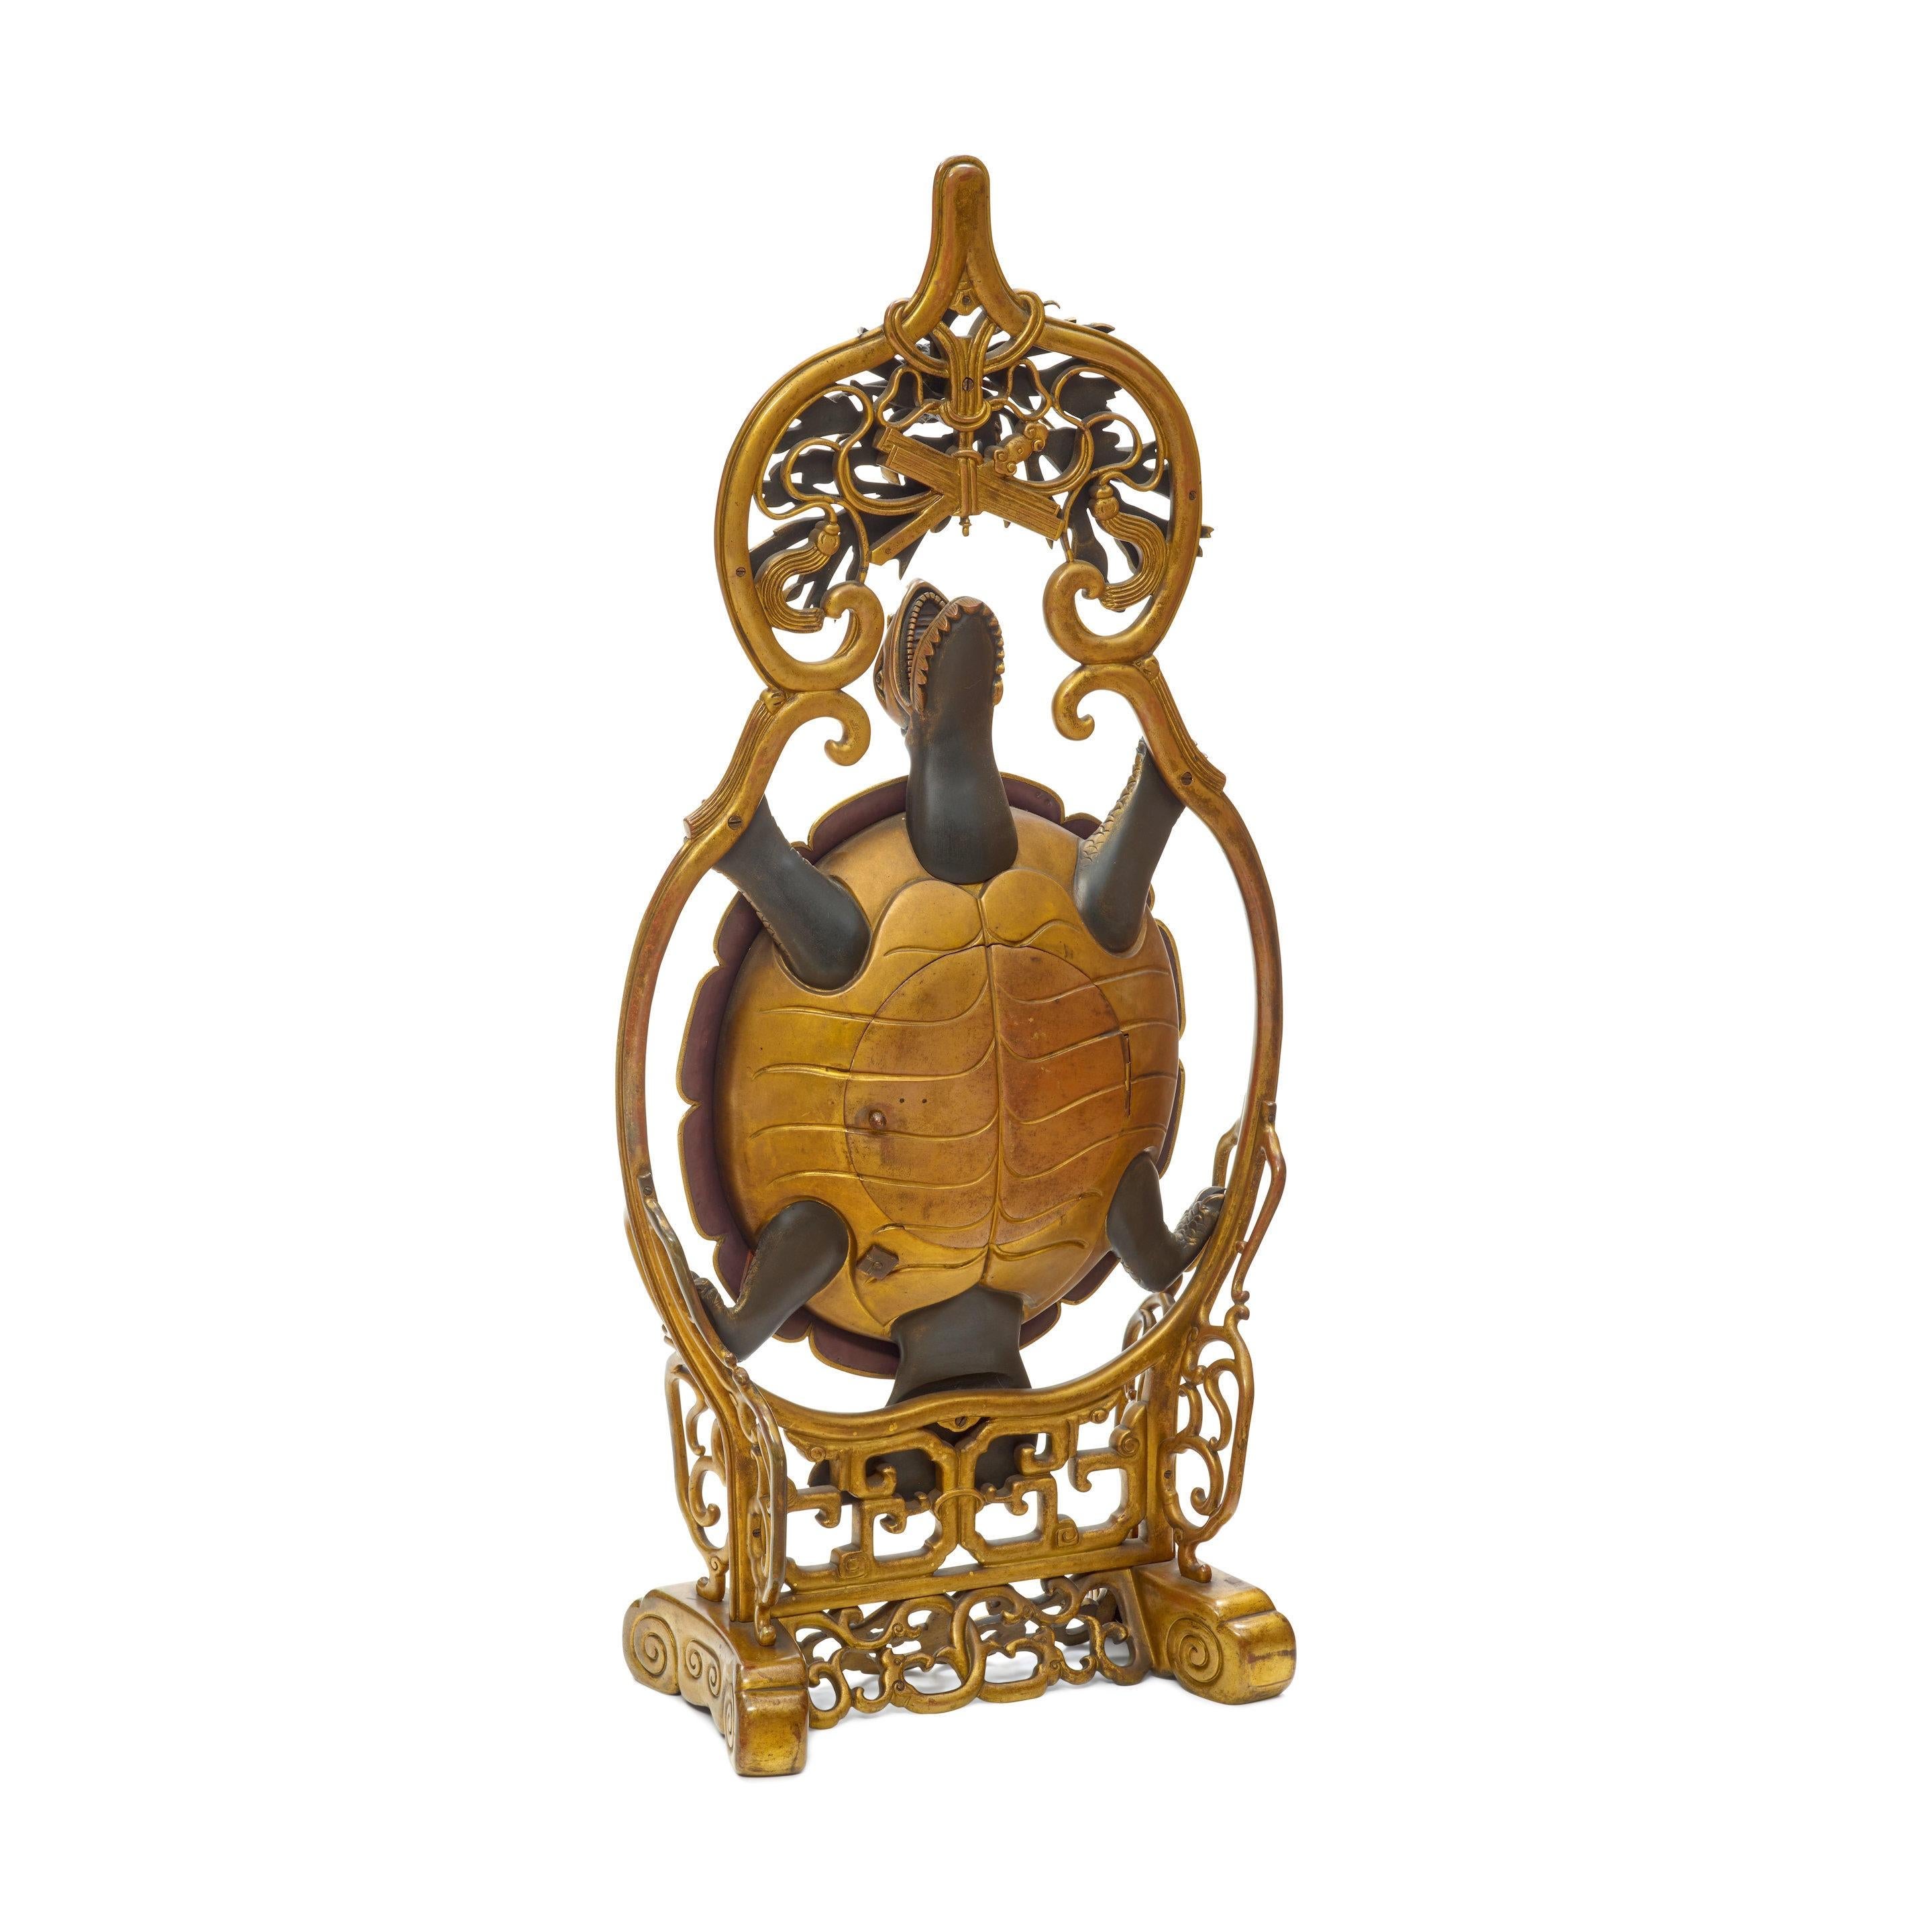 A FRENCH JAPONAISE CLOISONNÉ GILT AND PATINATED METAL TURTLE-FORM CLOCK
Almost certainly designed by Émile-Auguste Reiber for L'Escalier de Cristal, Paris, circa 1870-80
Impressed to works 23642.
height 33in (84cm); width 15in (38cm); depth 7 1/4in